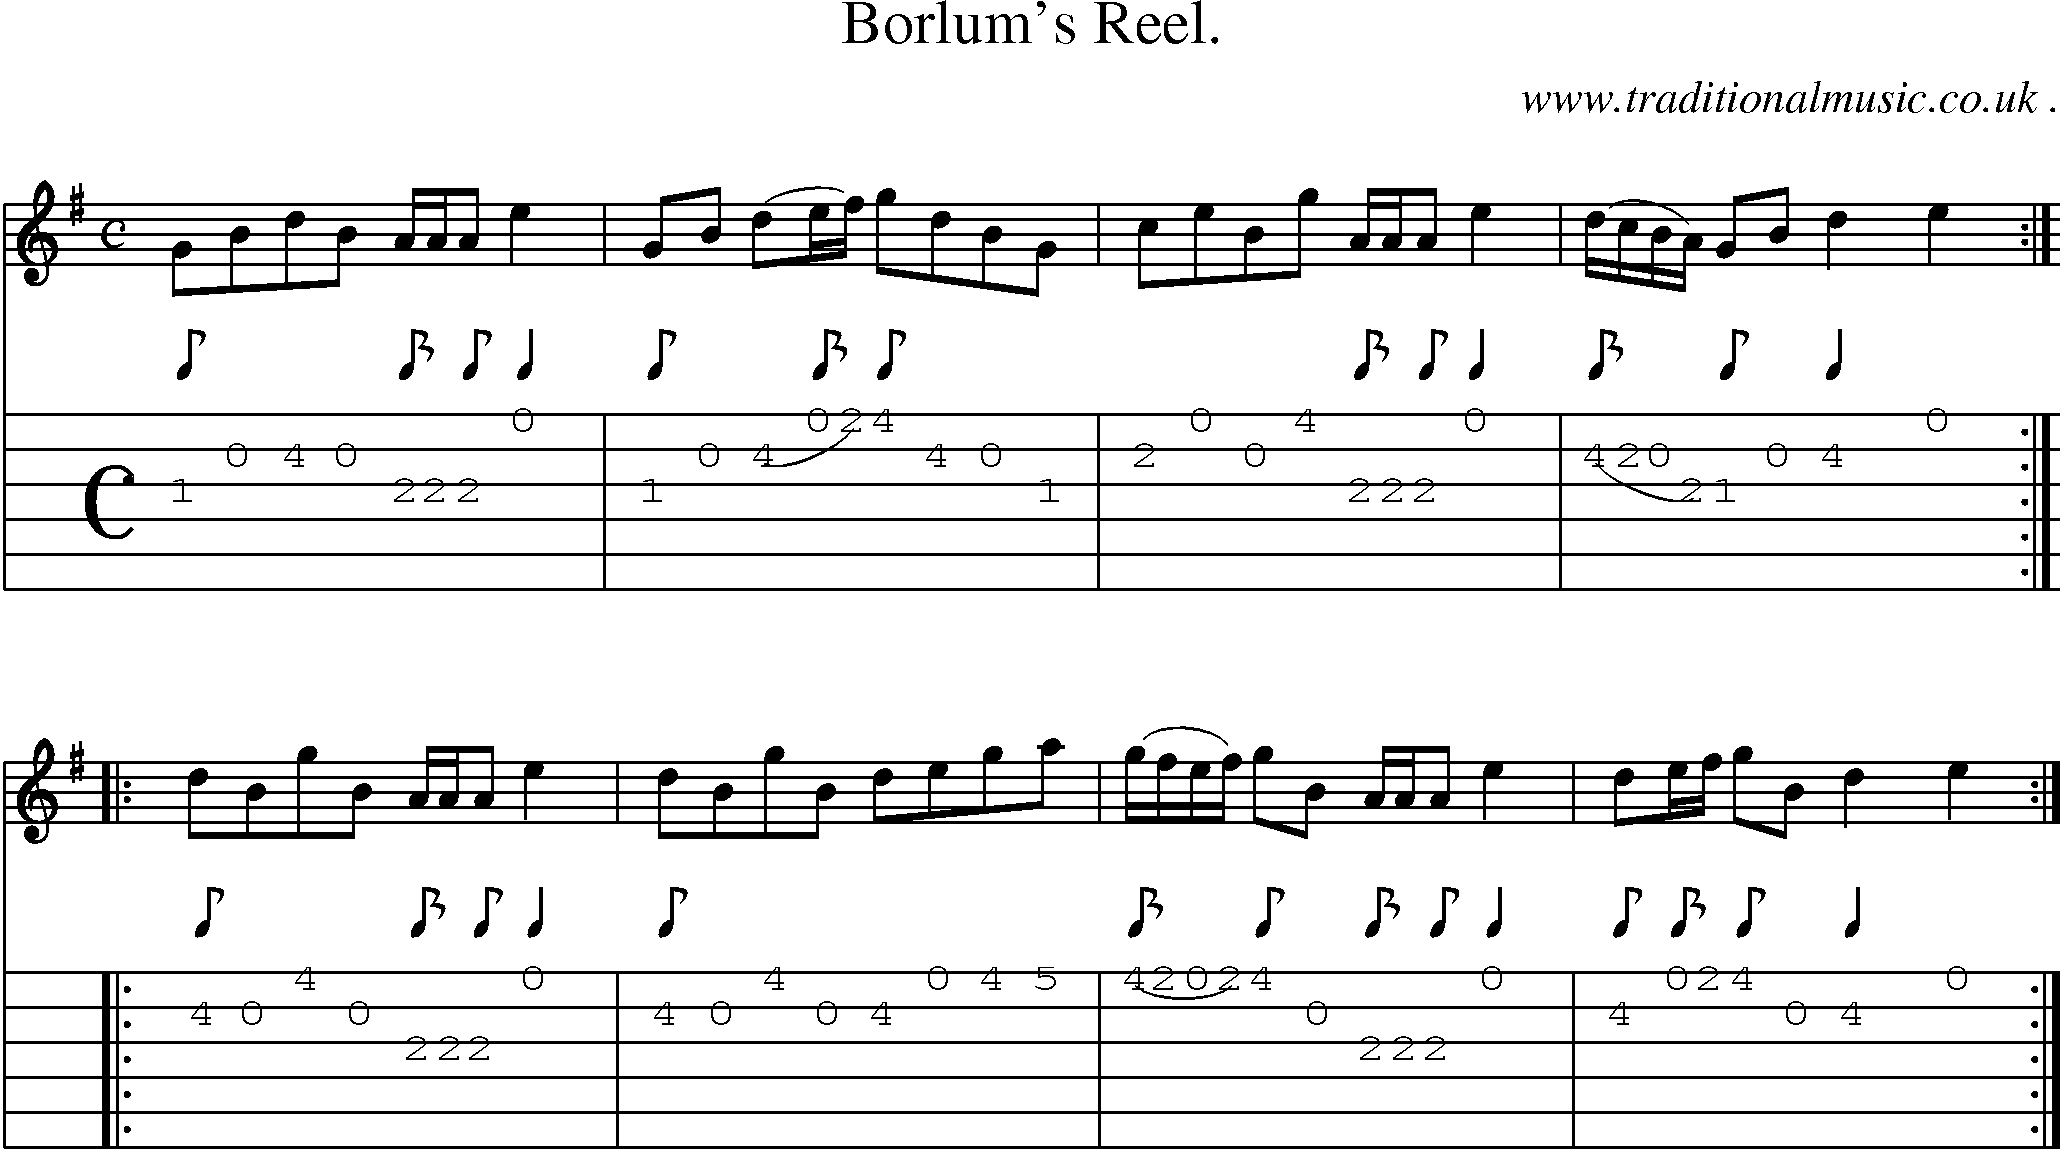 Sheet-Music and Guitar Tabs for Borlums Reel